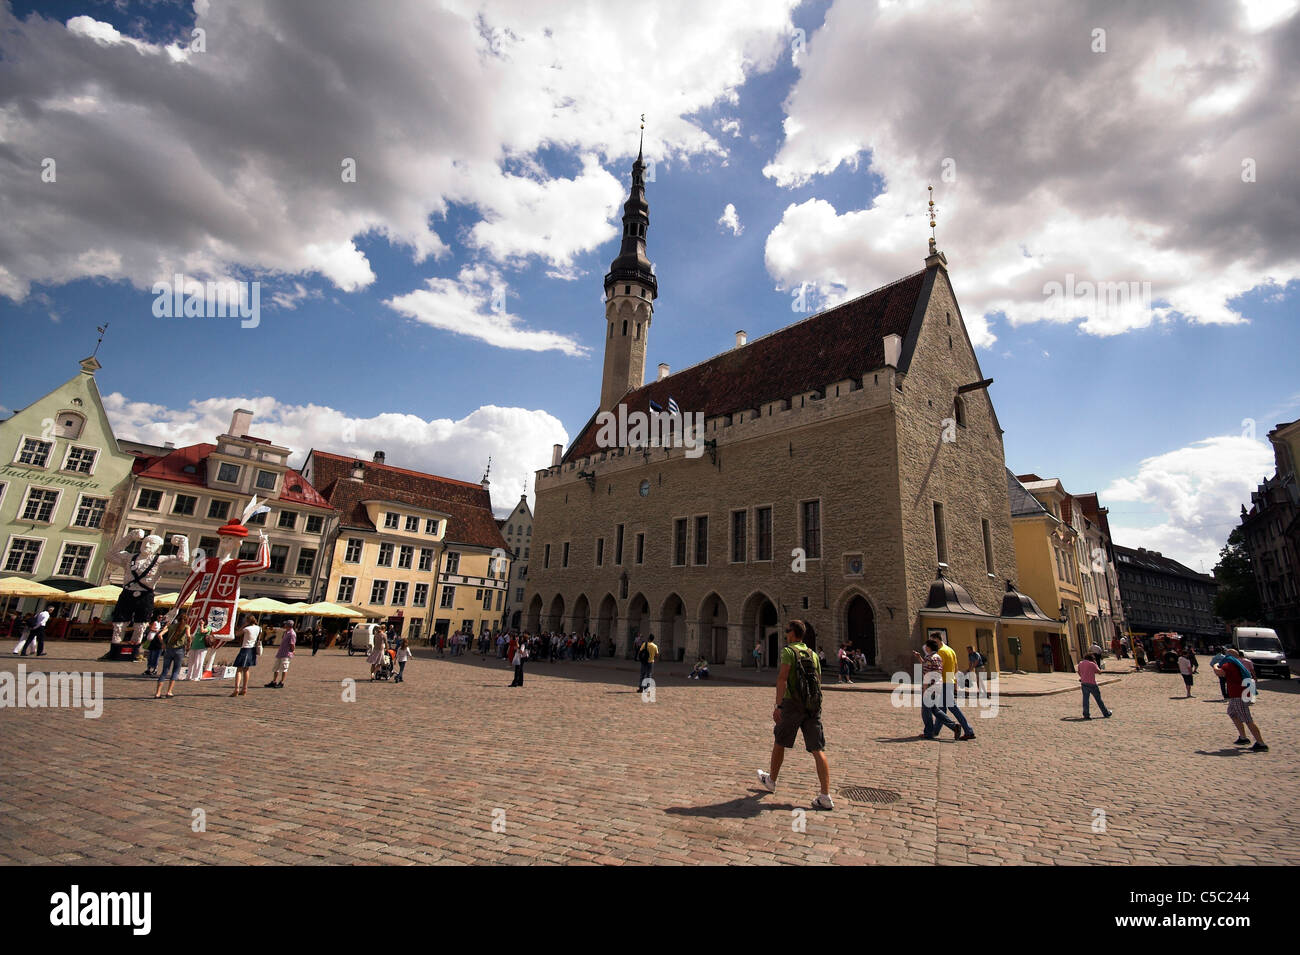 Town Hall building, Town Hall Square in the Old Town, Tallinn, Estonia Stock Photo